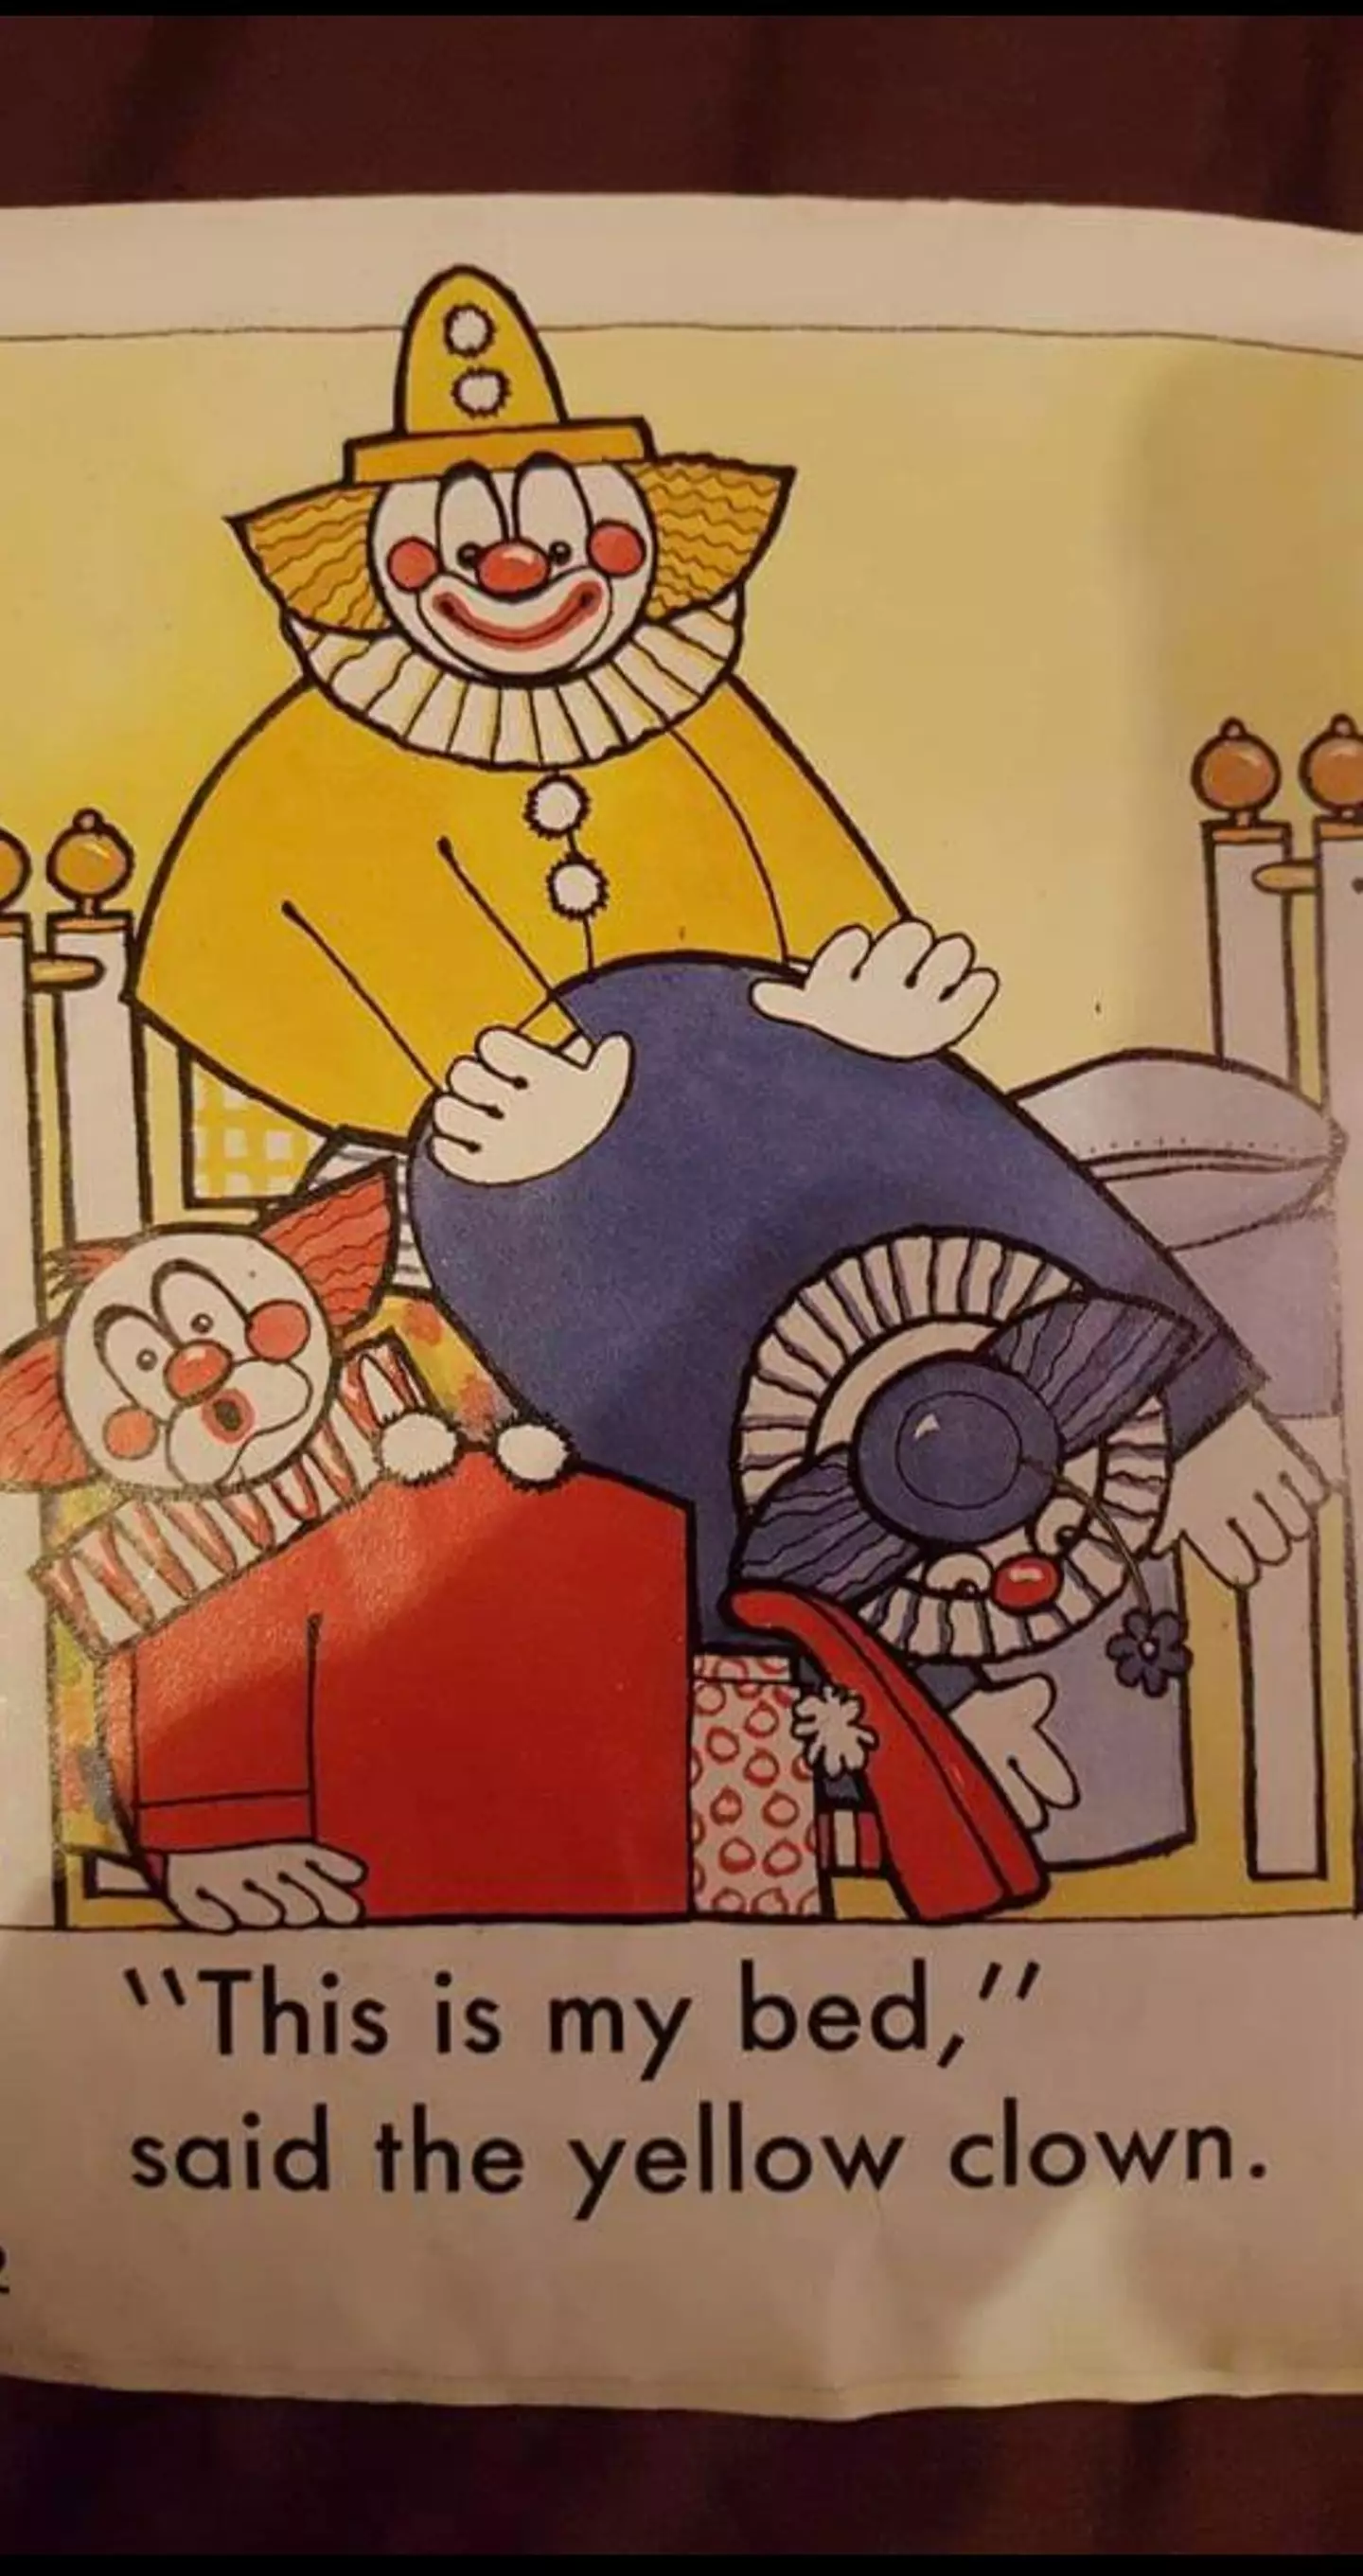 Another user shared an image from their kid's reading book.